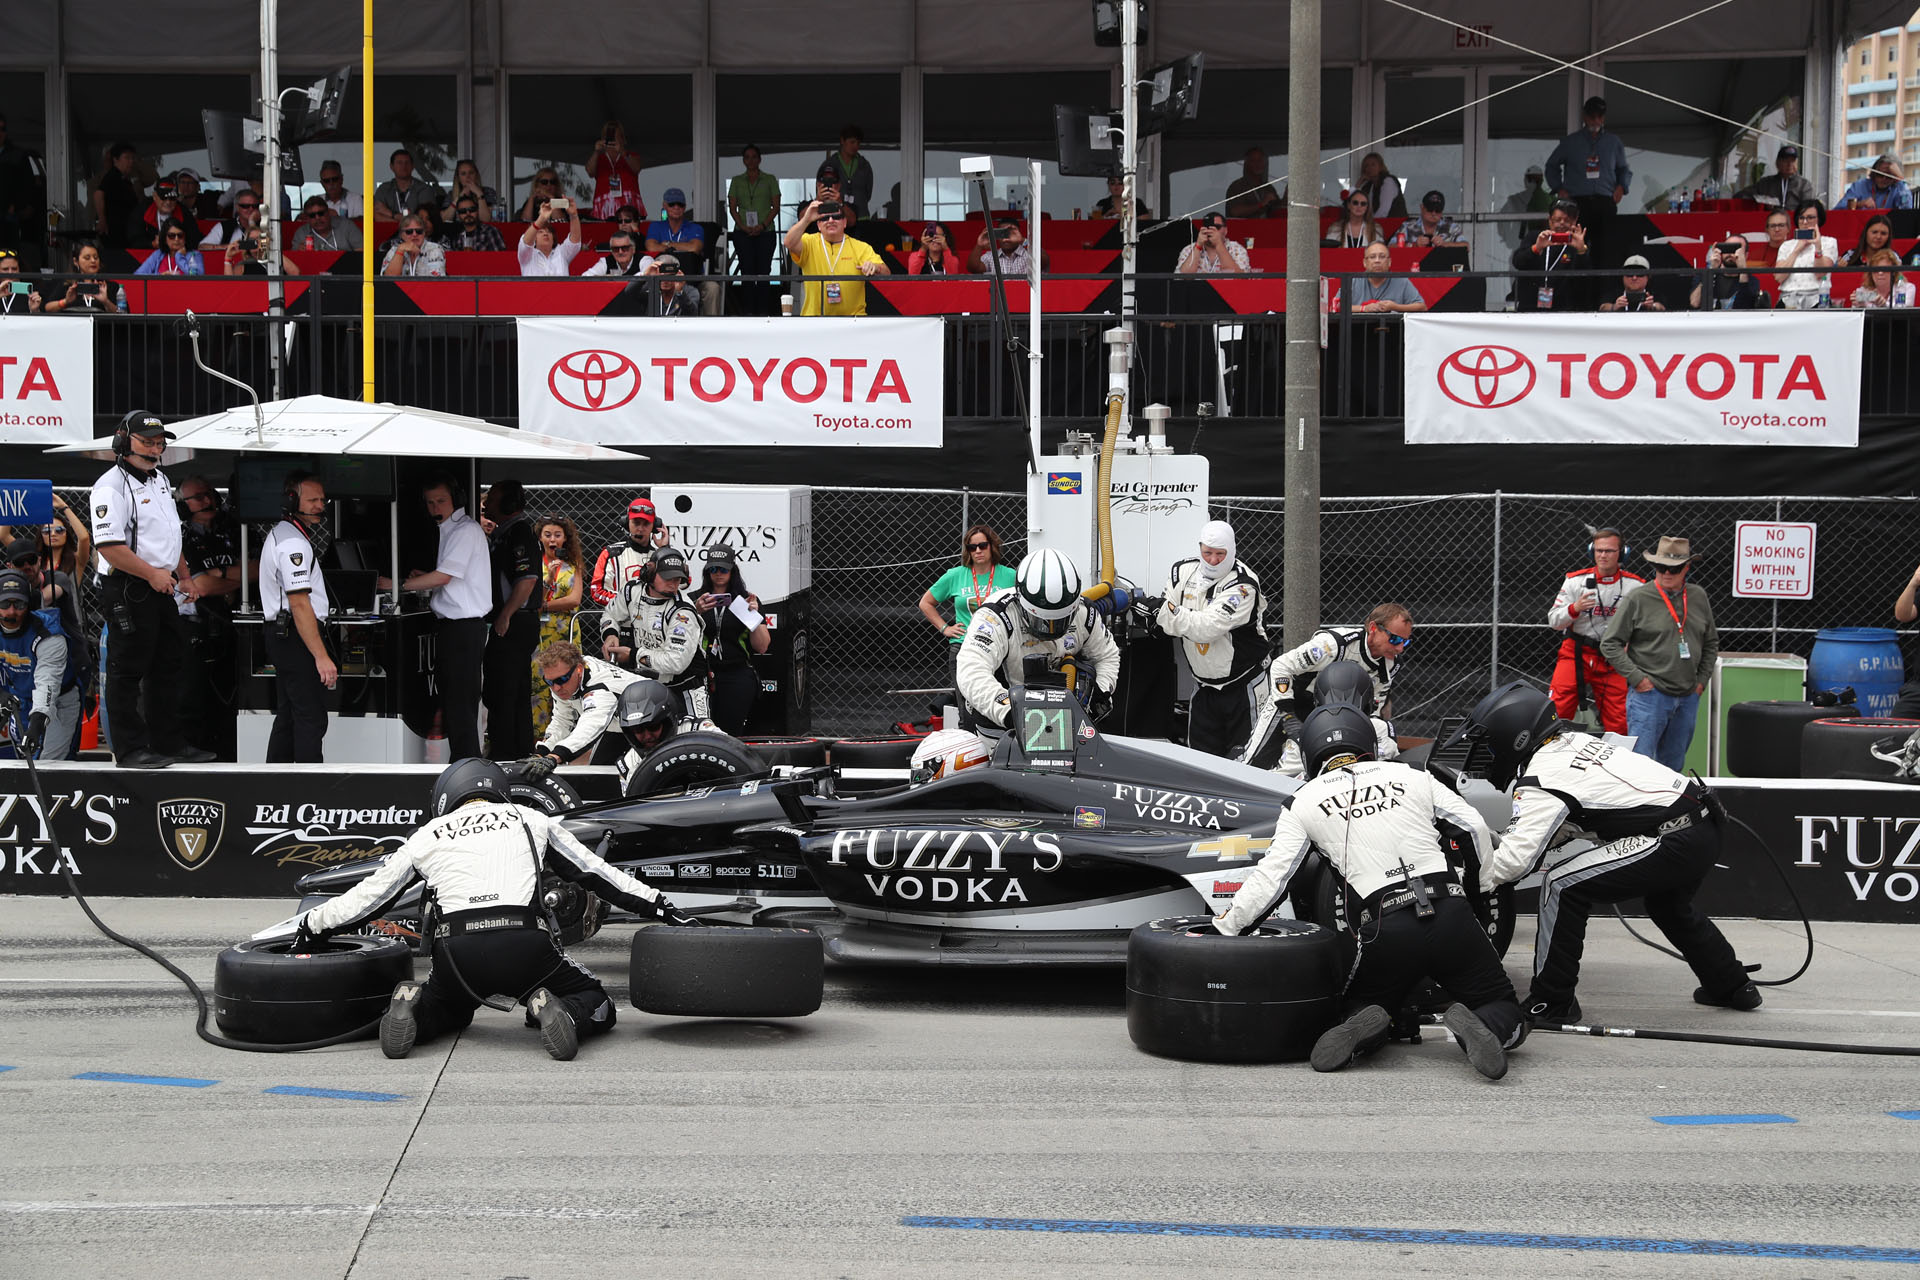 Toyota Ends Long Beach Grand Prix Title Sponsorship After 44 Years